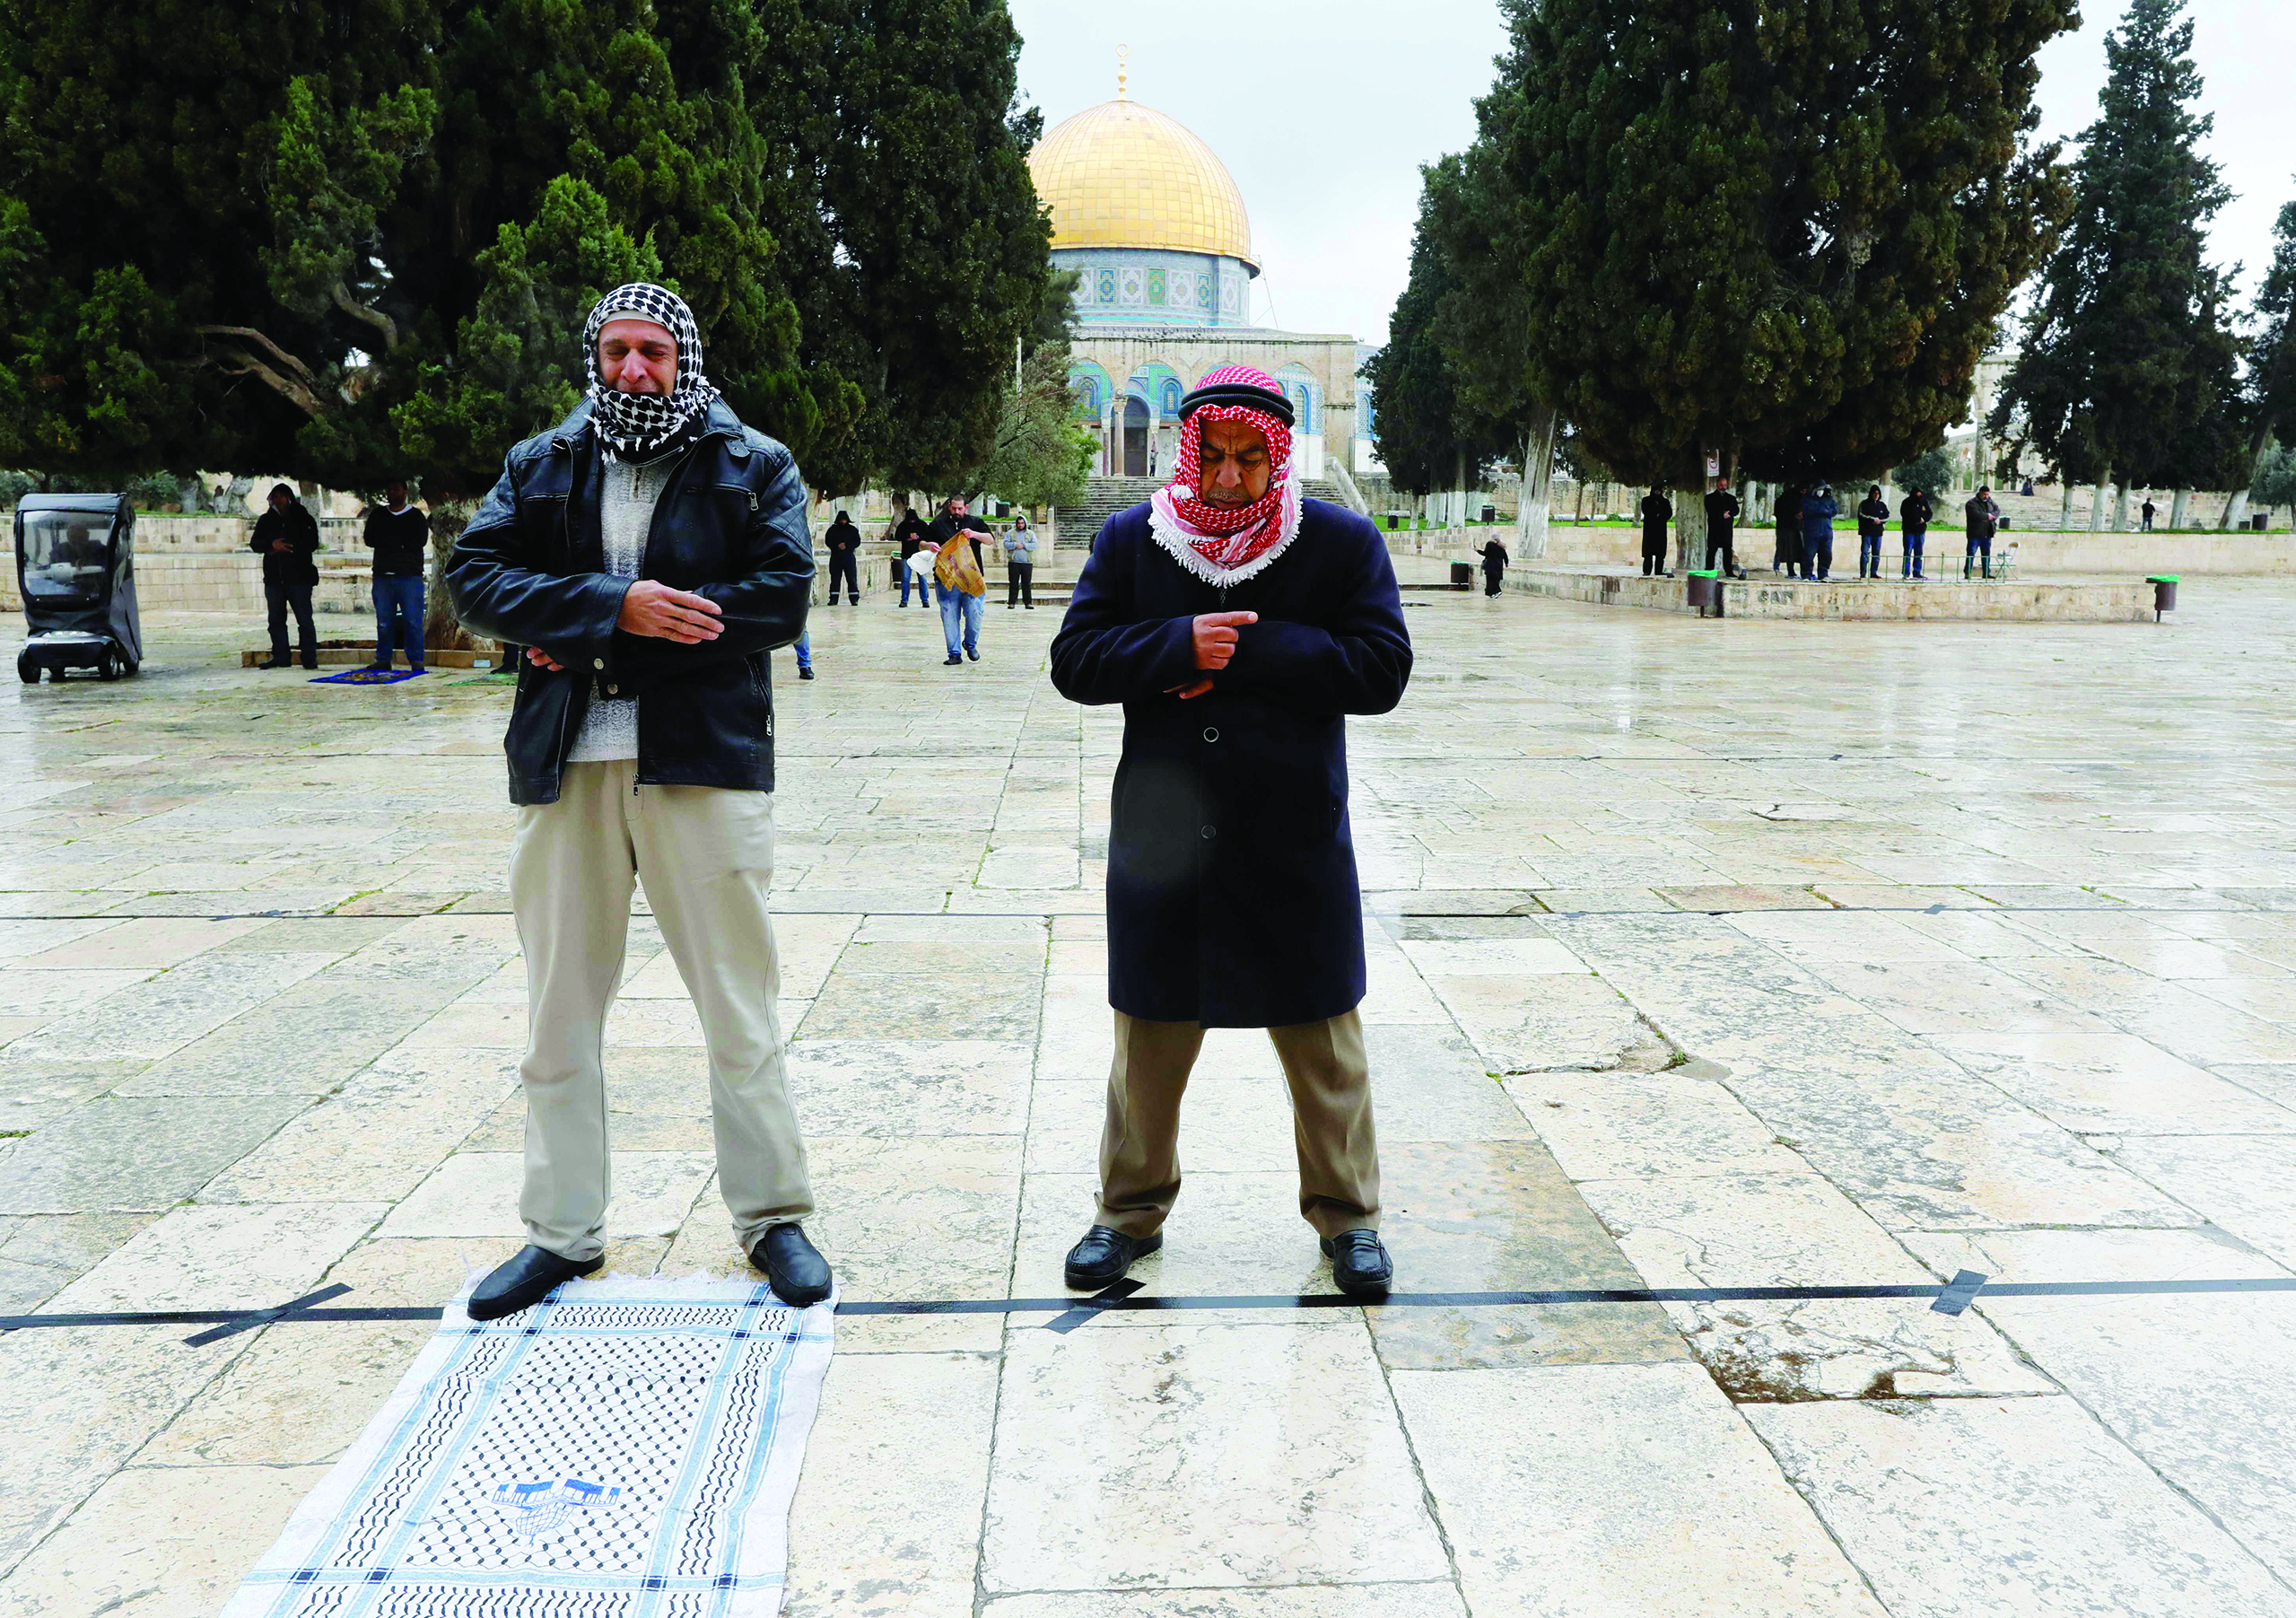 Palestinians perform their Friday prayers in the almost deserted Al-Aqsa mosque compound in the Old City of Jerusalem, after clerics took protective measures and ordered the mosques shut in a bid to stem the spread of the novel coronavirus, on March 20, 2020. - Israel has 433 confirmed cases of COVID-19, with another 44 in the occupied Palestinian territories and tens of thousands in self-isolation. (Photo by AHMAD GHARABLI / AFP)